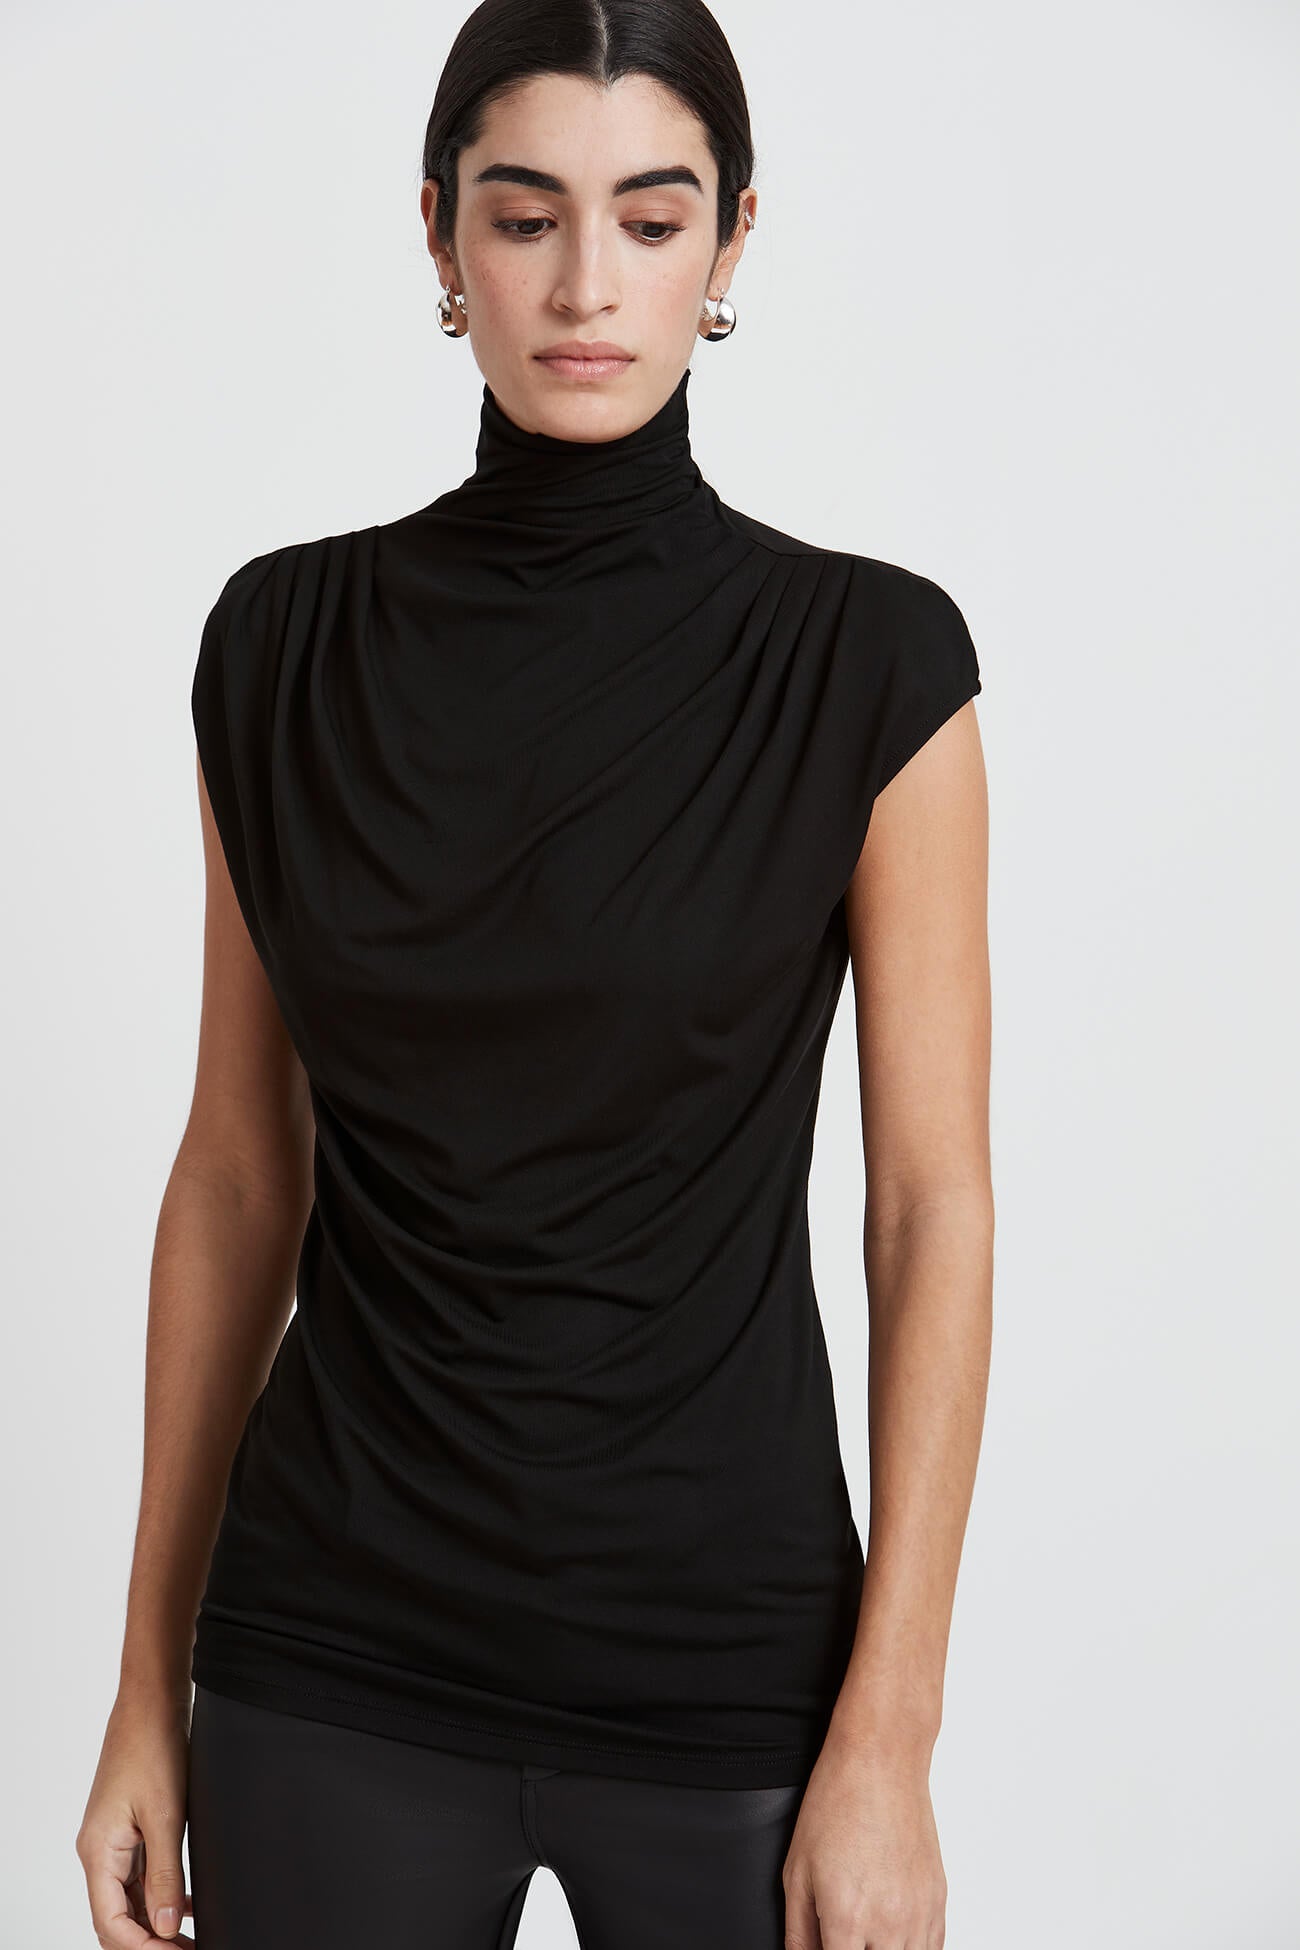 Black Fitted Cap Sleeved Top - Delancey Top | Marcella